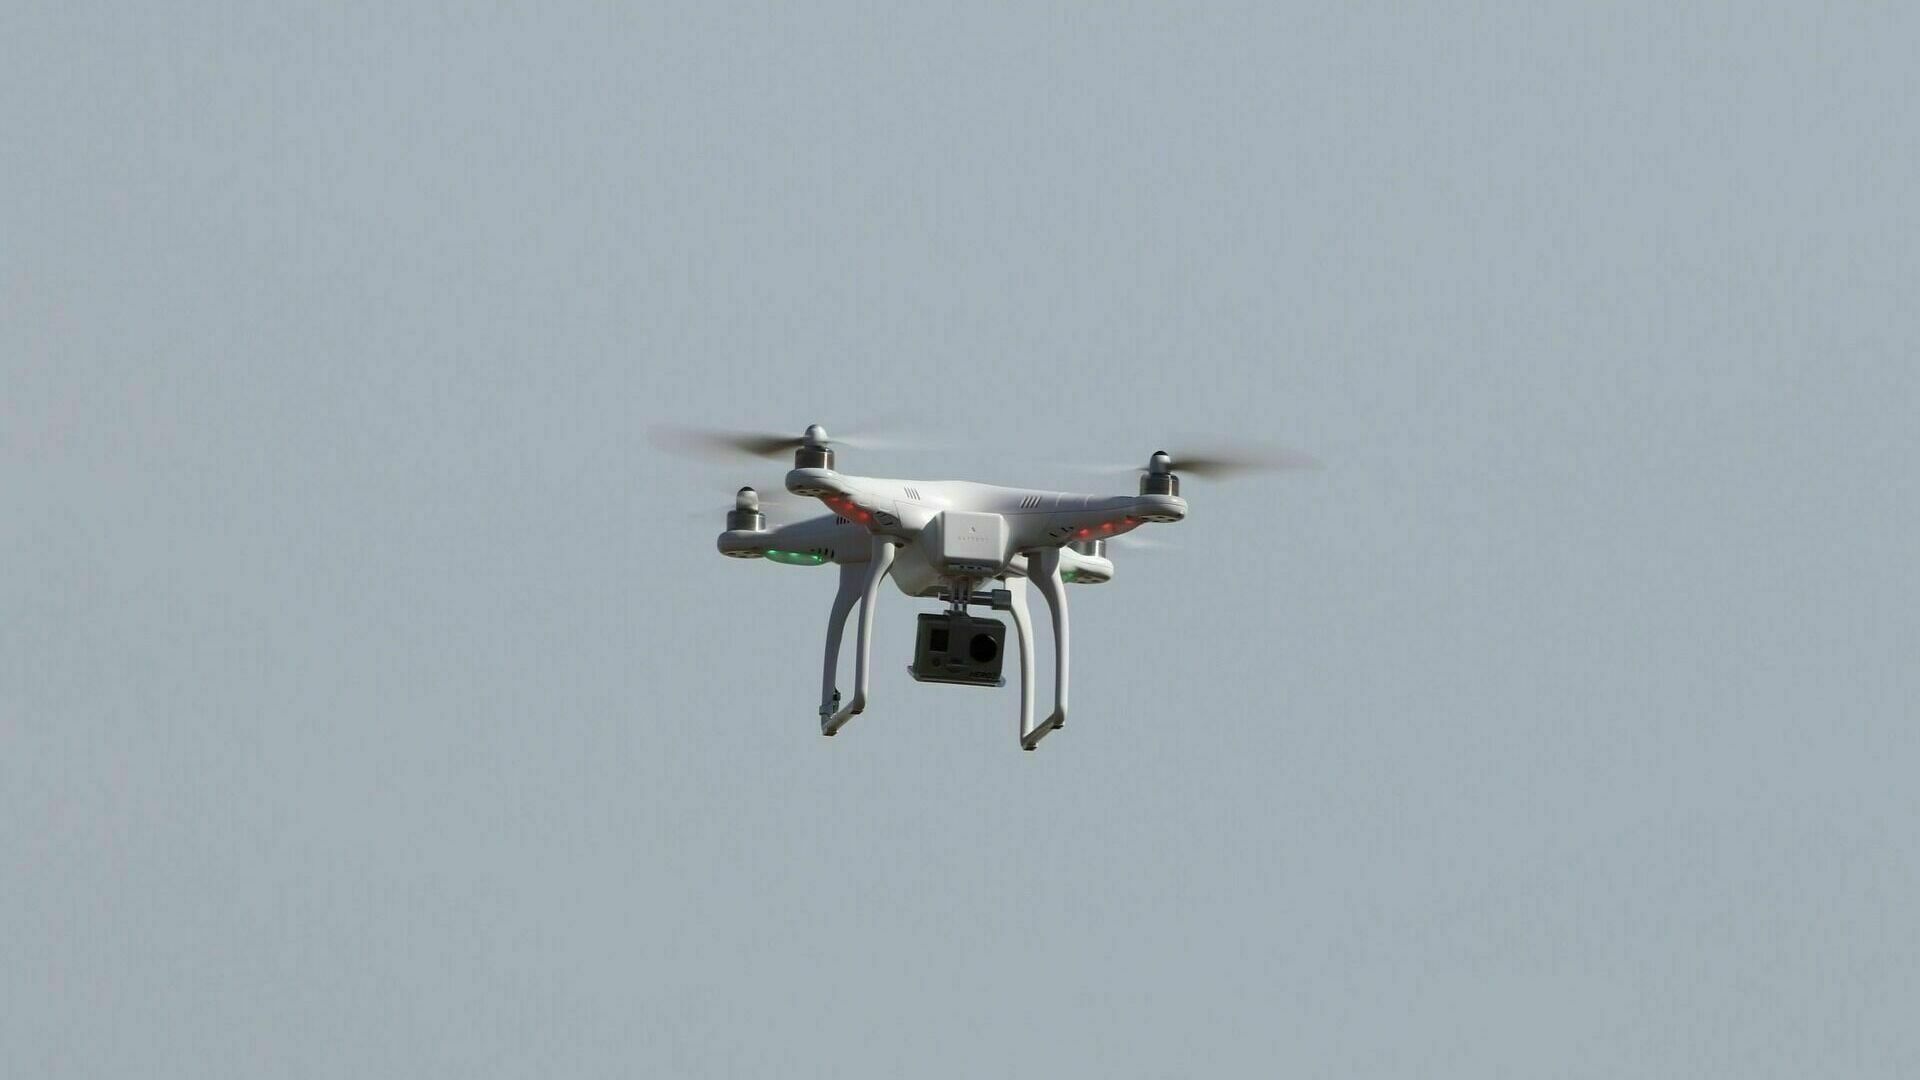 The use of drones has been restricted in the Murmansk region